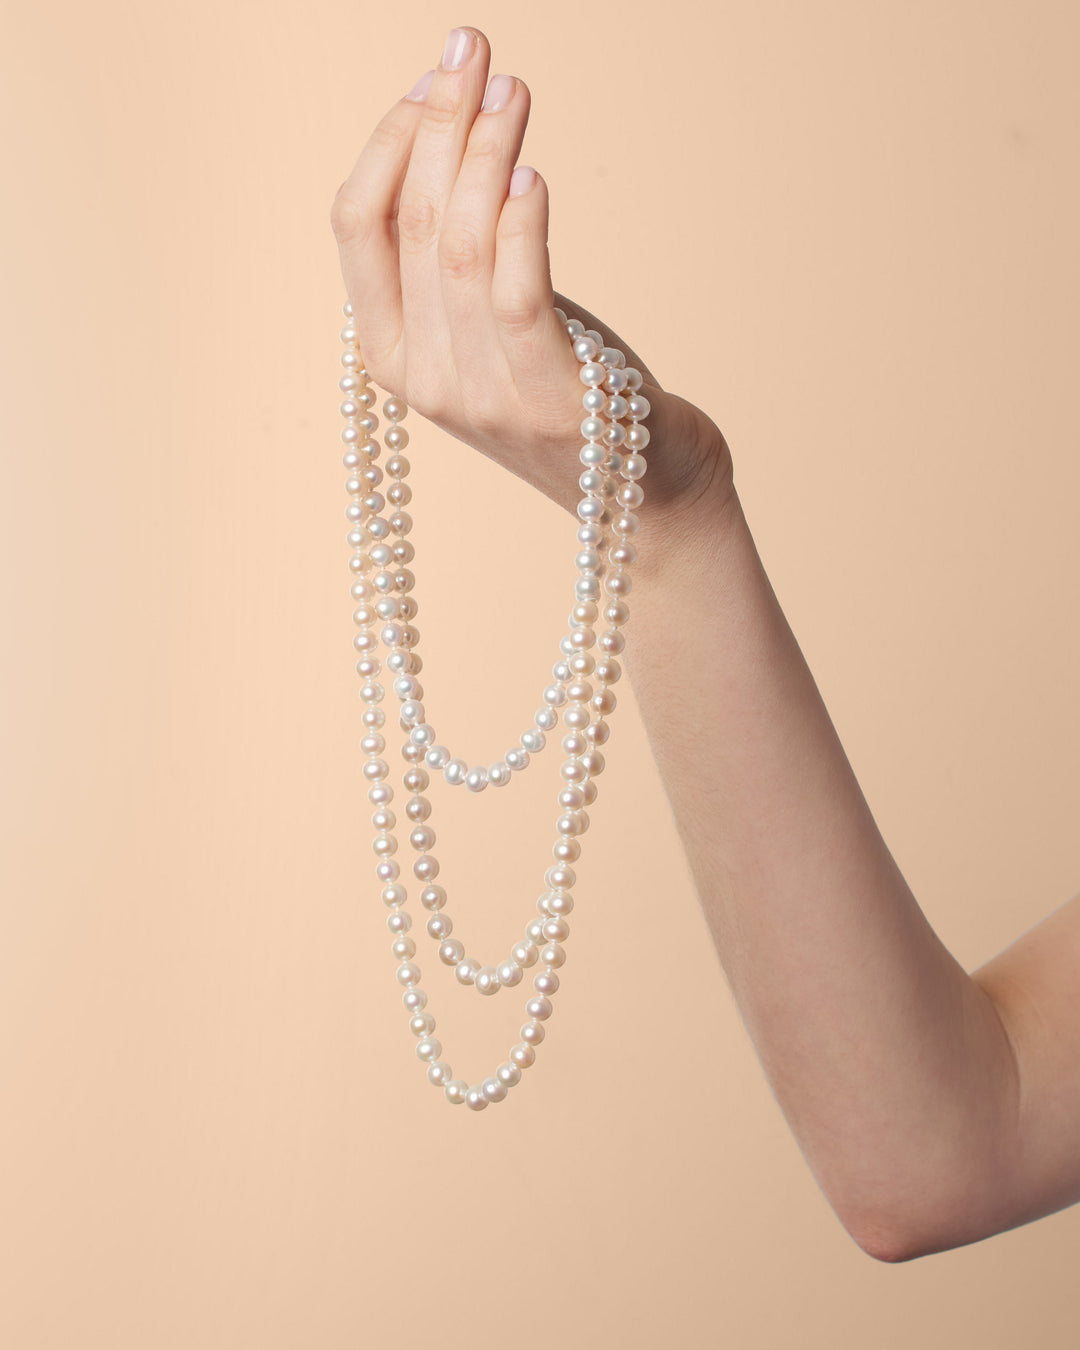 Pearl Necklaces certified and guaranteed - the finest in the world